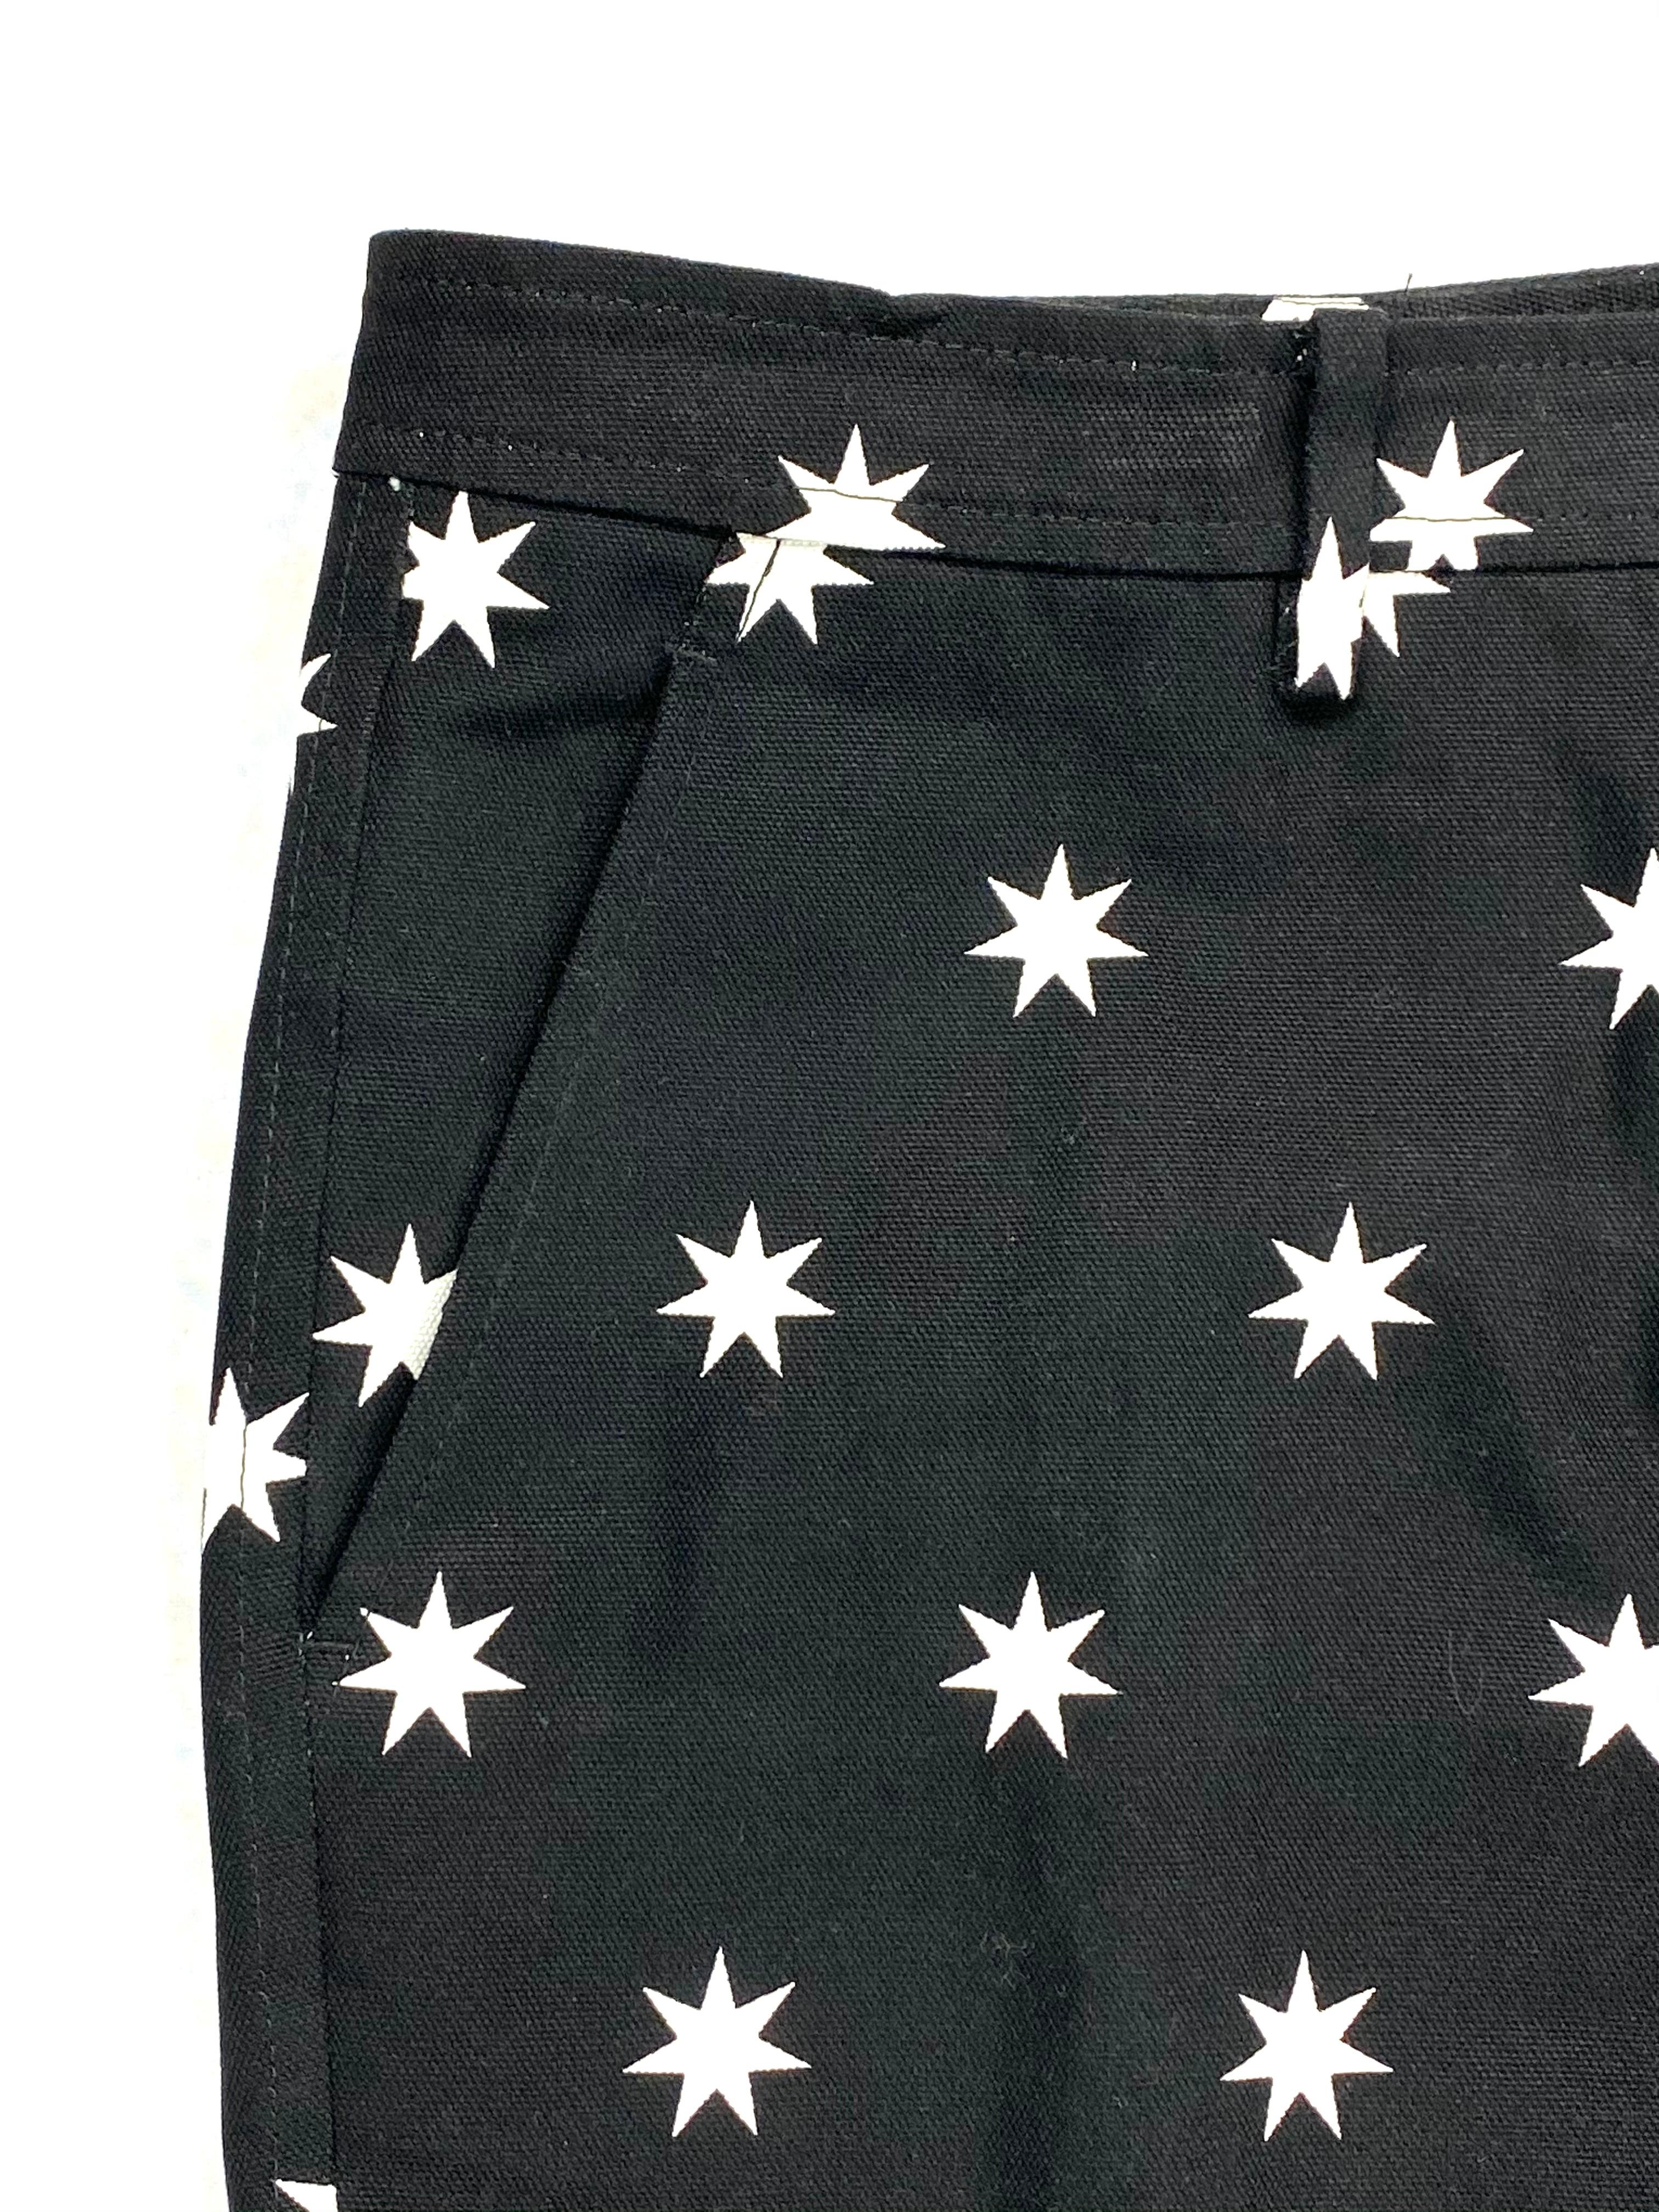 Product details:

Featuring cotton black trousers with white star pattern, straight fit, side pockets.